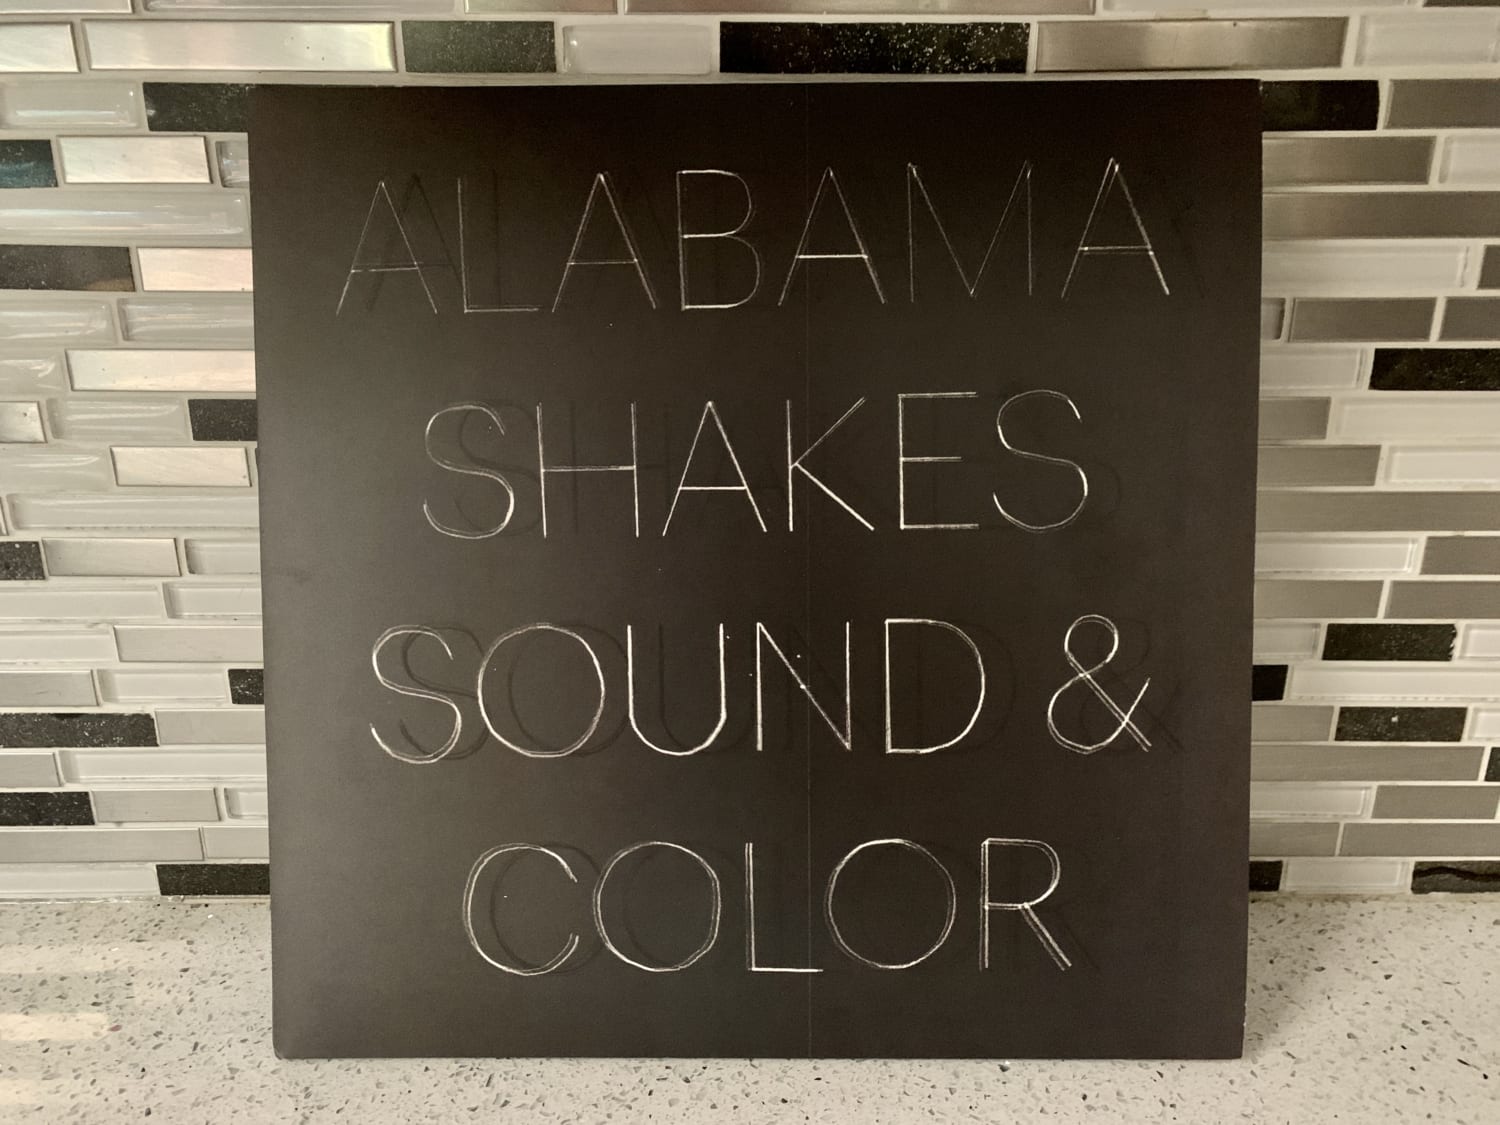 Image of Alabama Shakes' album Sound & Color on clear vinyl. This is one of three albums William Dyson would listen to forever.